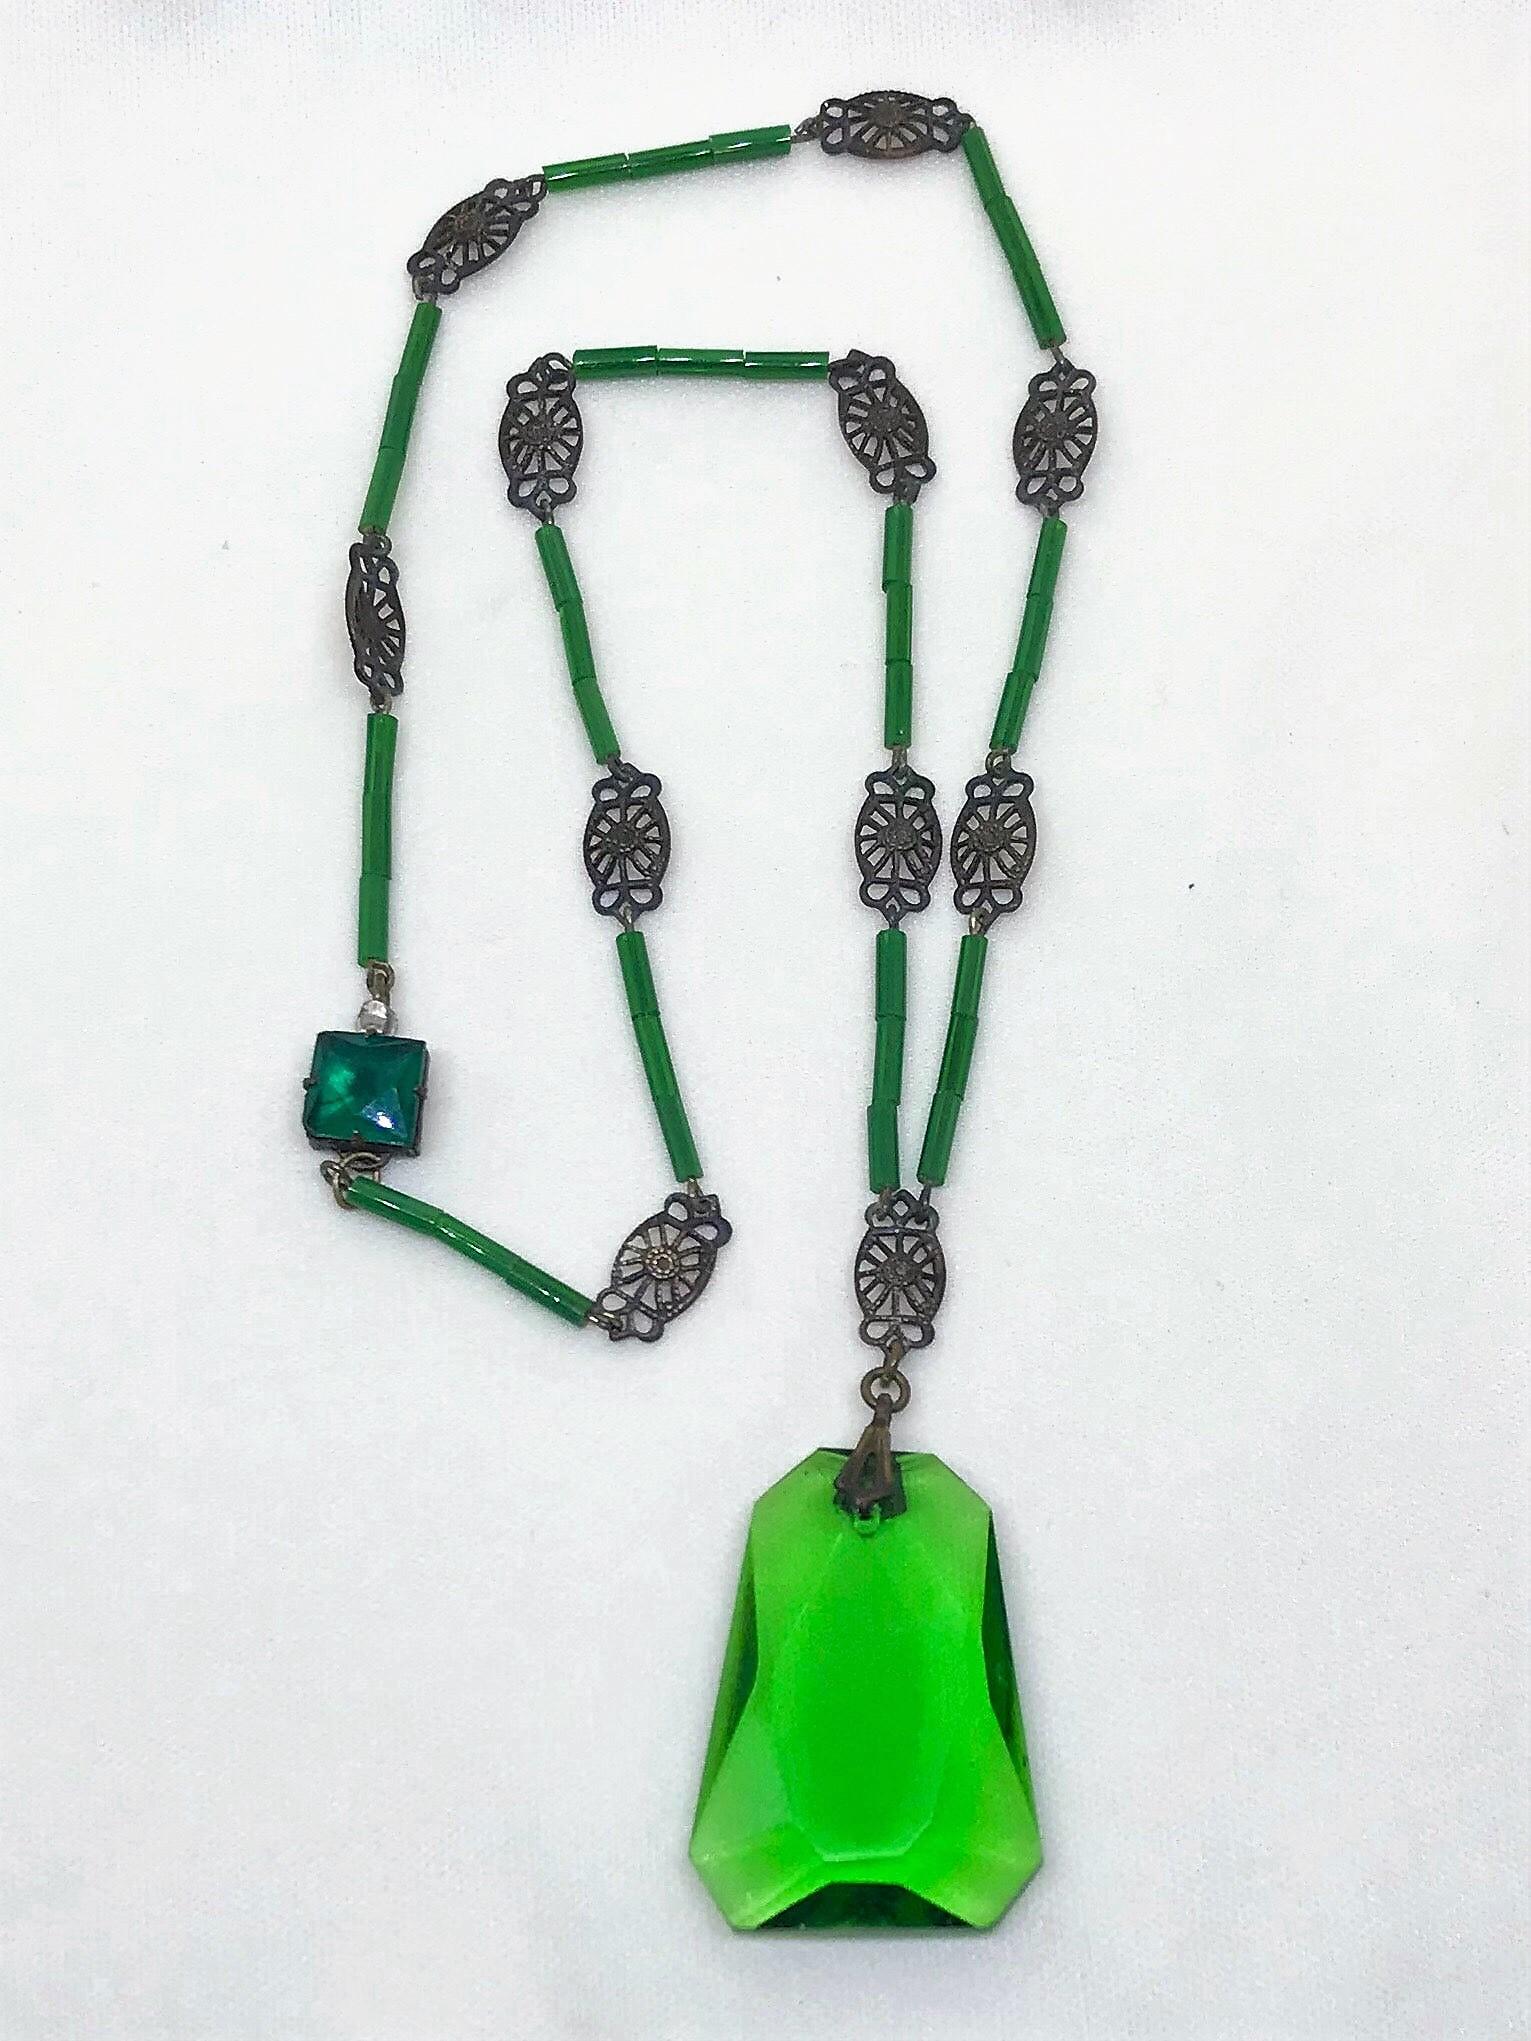 Circa 1920s necklace of green glass tube beads interspaced with ornate brass links hung with a green faceted glass pendant.  It measures 17